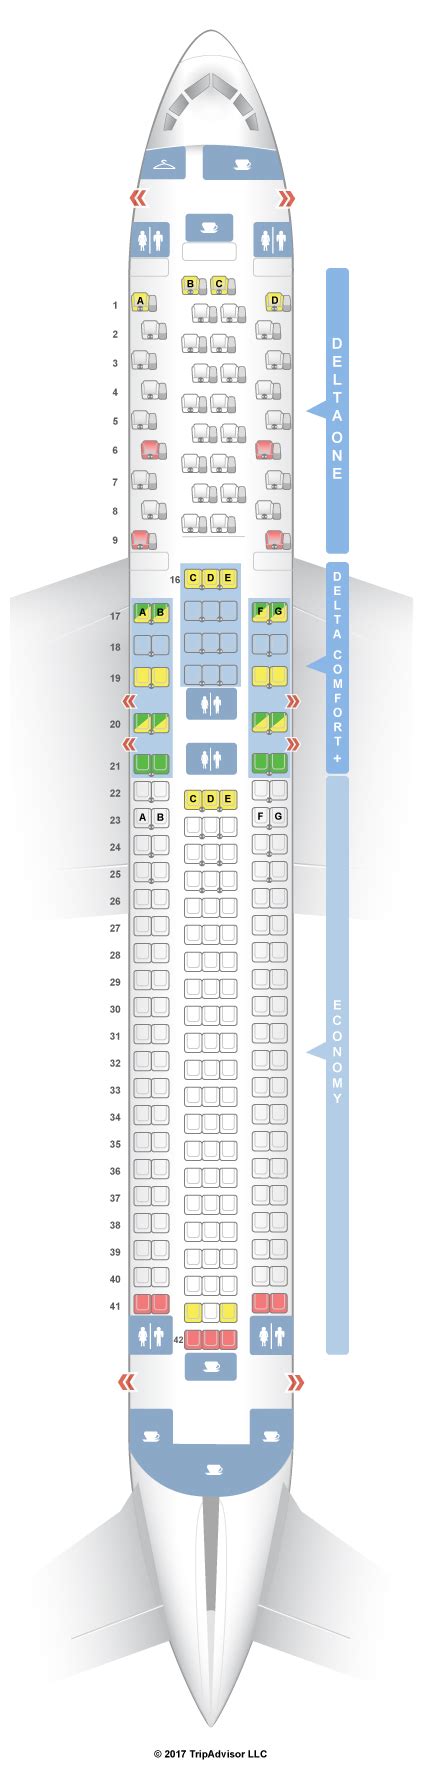 Boeing 767-300ER (76L) Layout 2. Note: There are 4 versions of this aircraft. Seat Map. Info. Photos. Click any seat for more information. Key. For your next Delta flight, use this seating chart to get the most comfortable seats, legroom, and recline on .. 